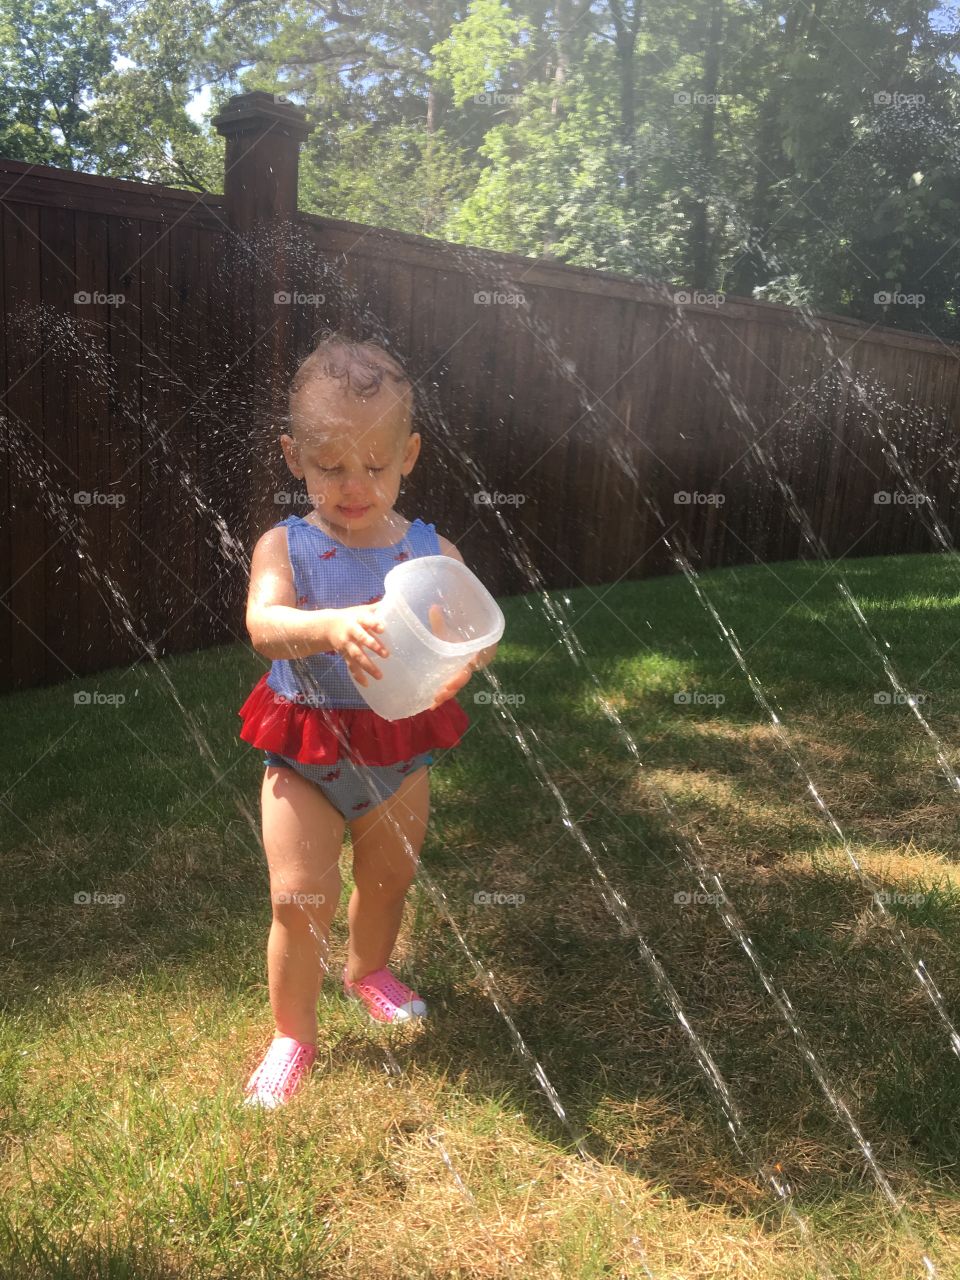 When you're air conditioner goes out and the heat index is 105 degrees, you HAVE to play in the sprinkler